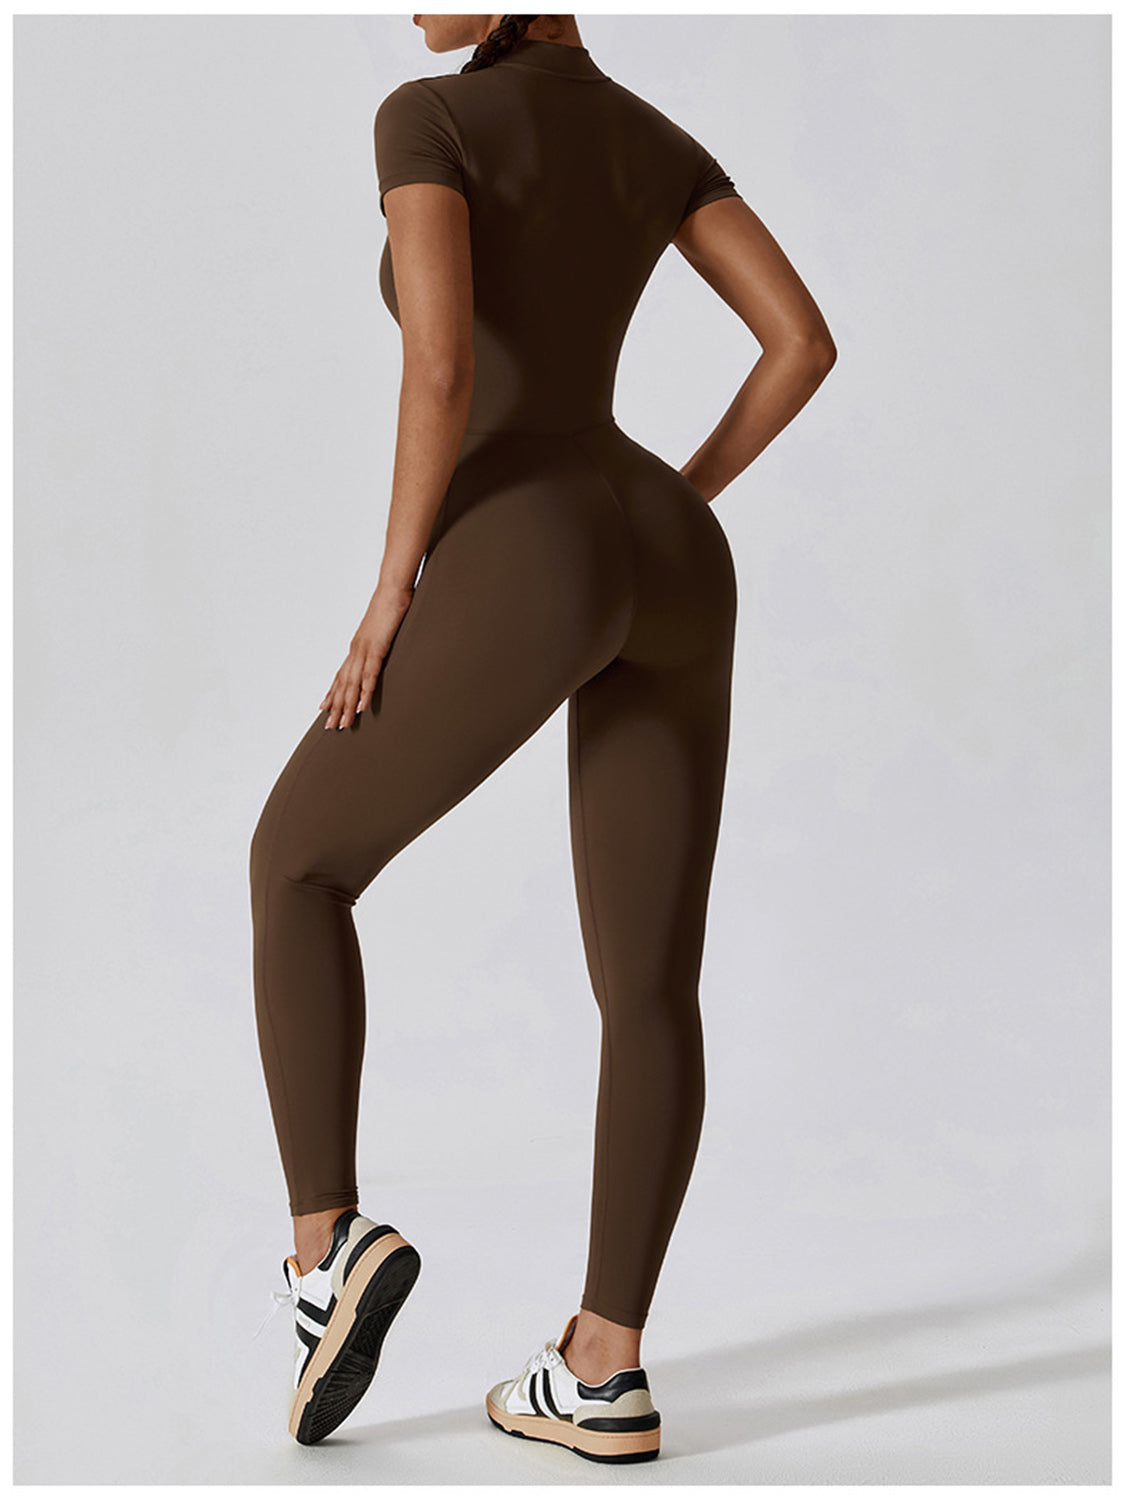 a woman in a brown bodysuit and sneakers